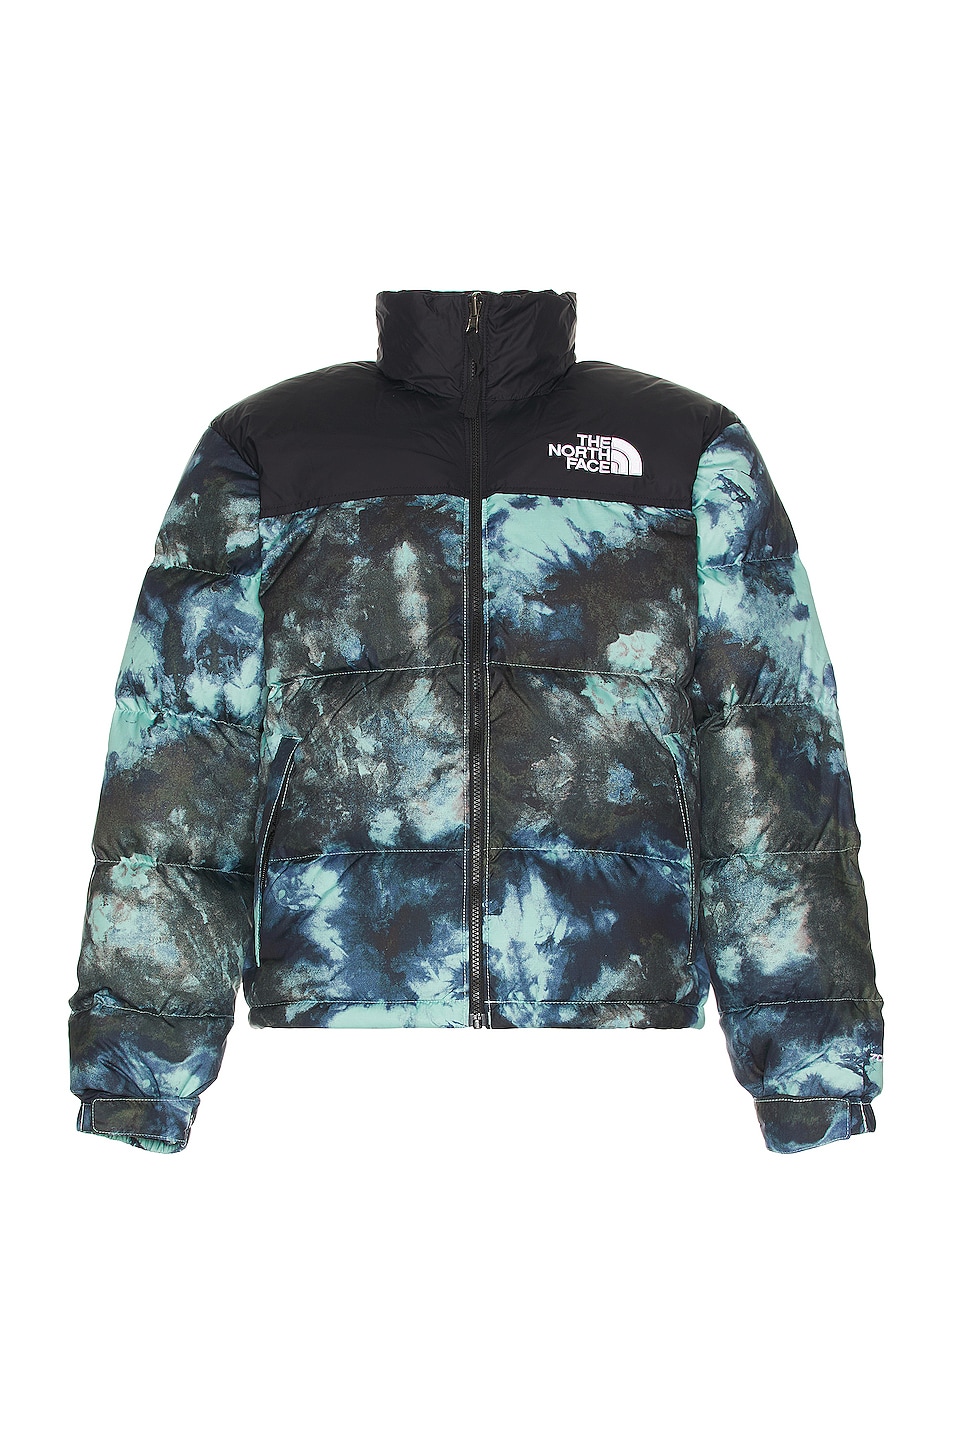 Image 1 of The North Face 1996 Retro Nuptse Jacket in Wasabi Ice Dye Print